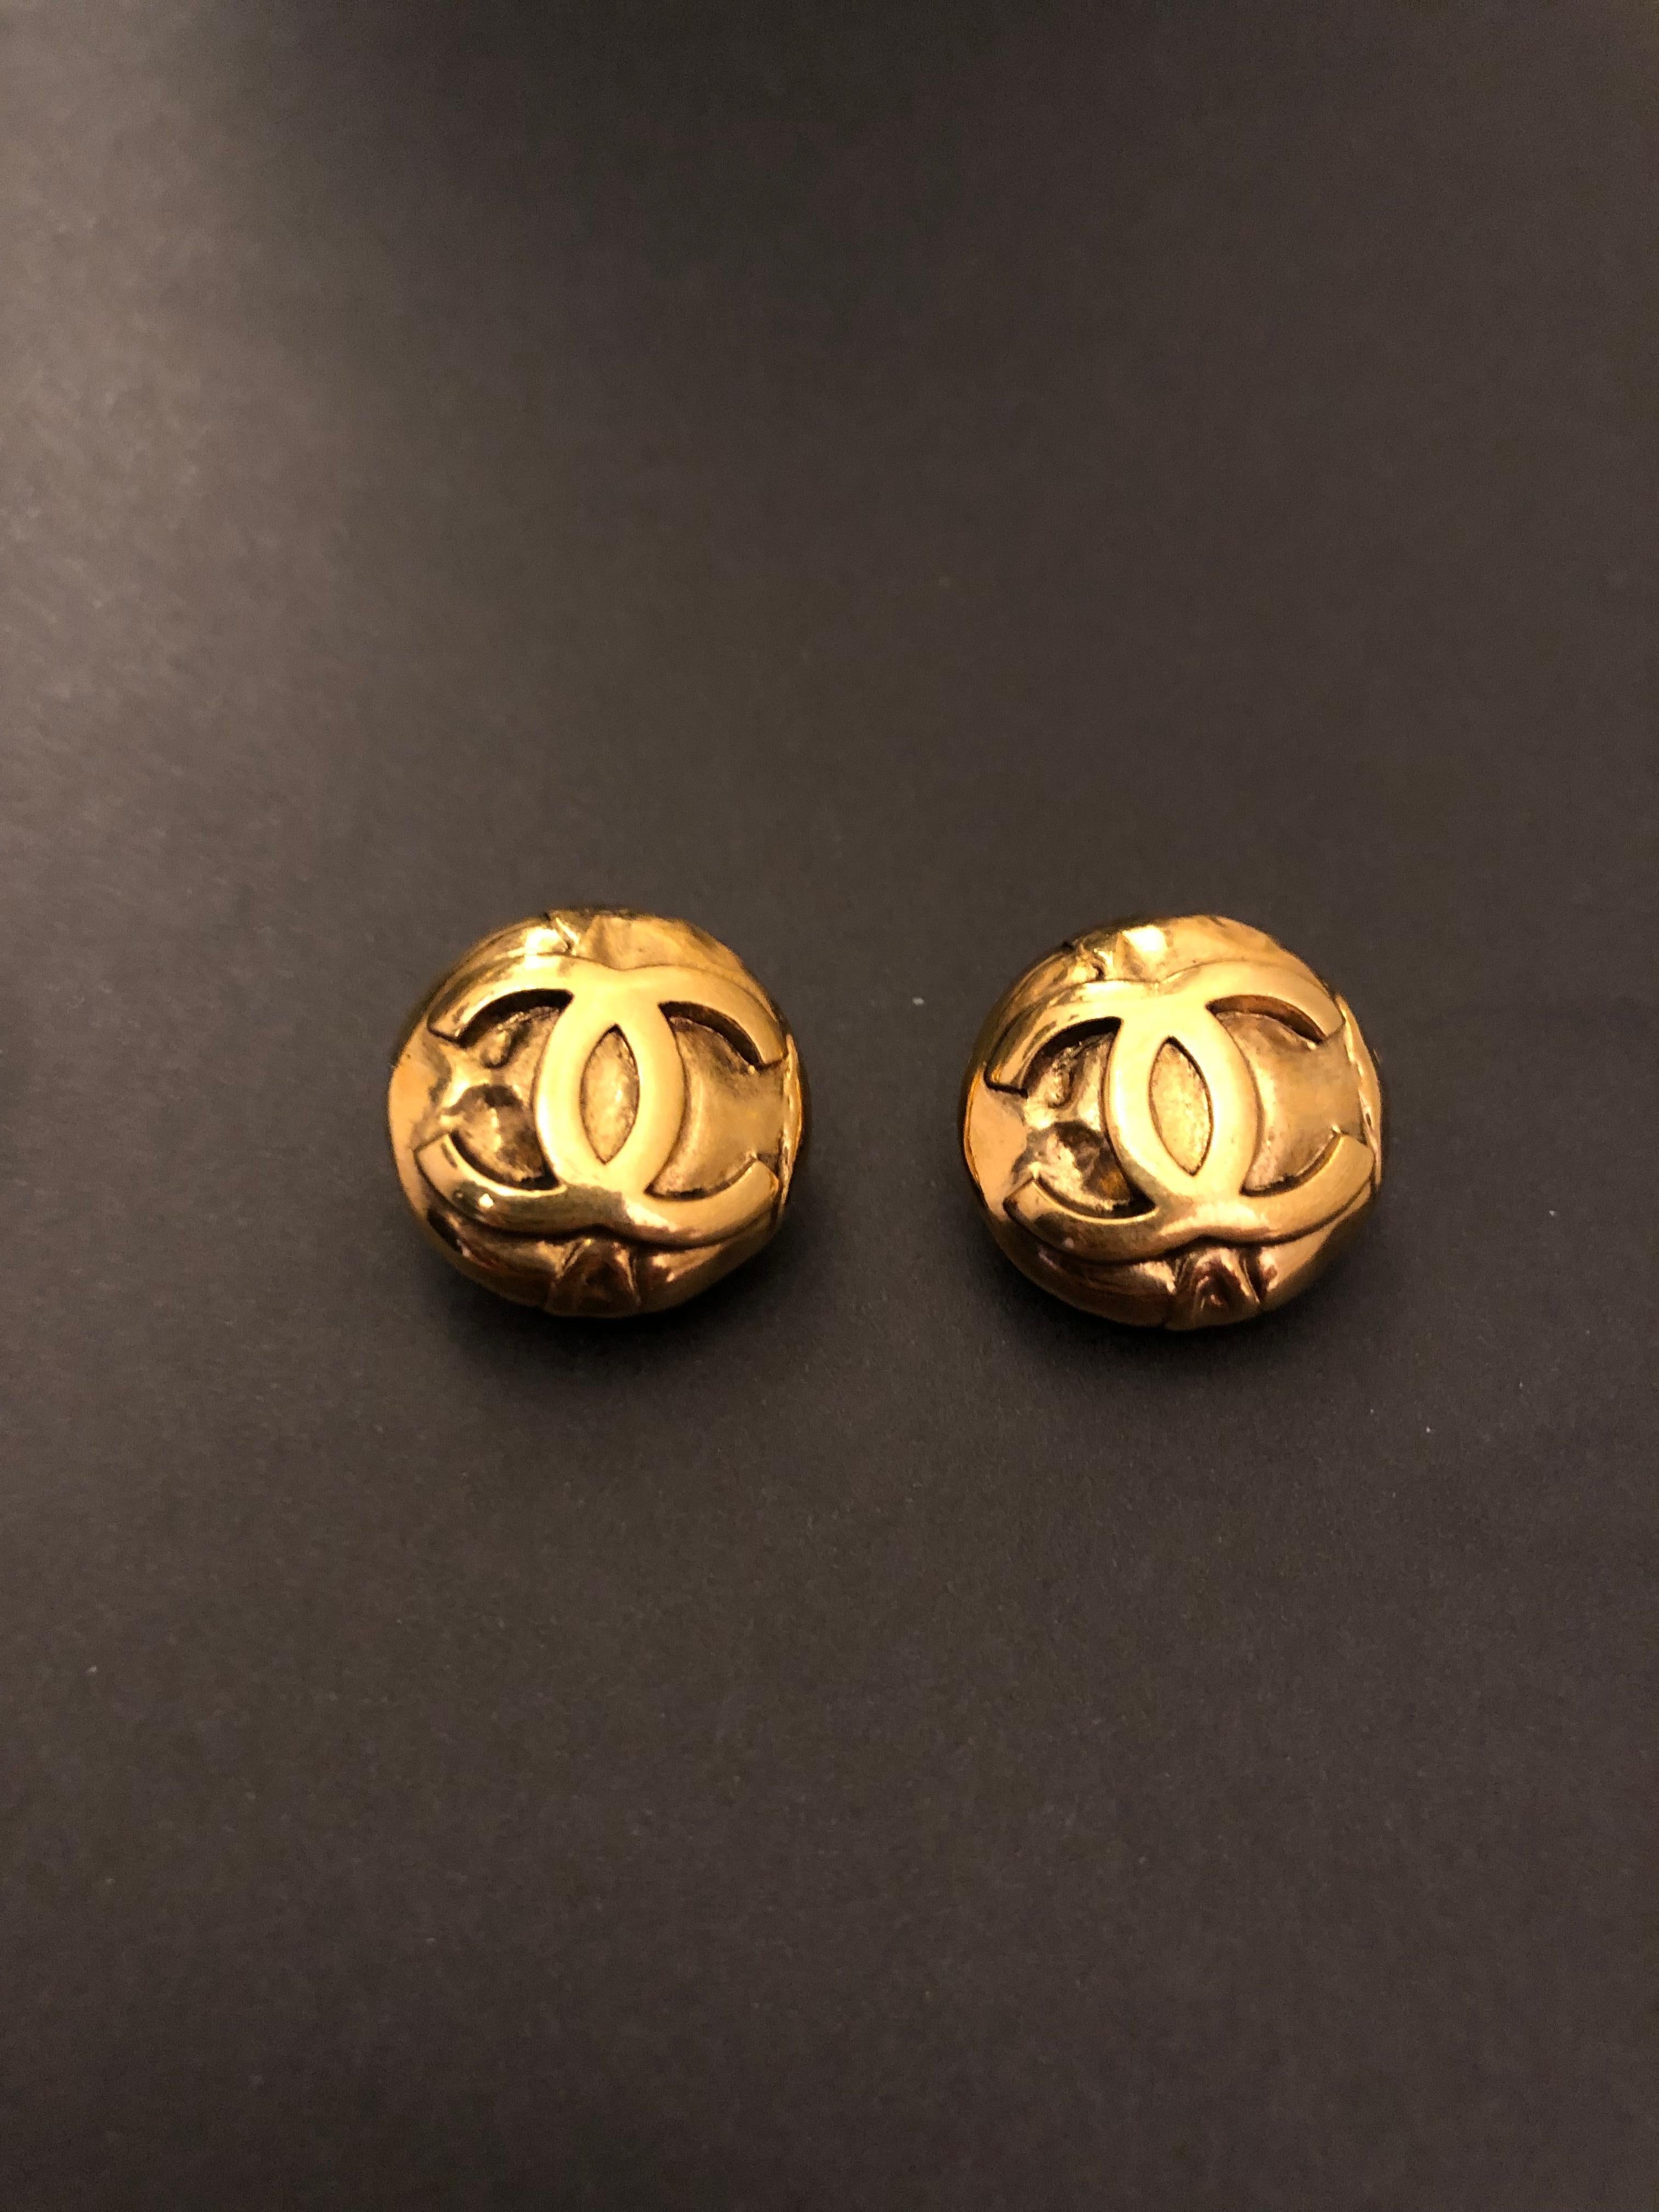 Vintage CHANEL gold toned clip-on earrings. Stamped CHANEL 96A made in France. Diameter measures approximately 2 cm. Come with box. 

Condition - MINT